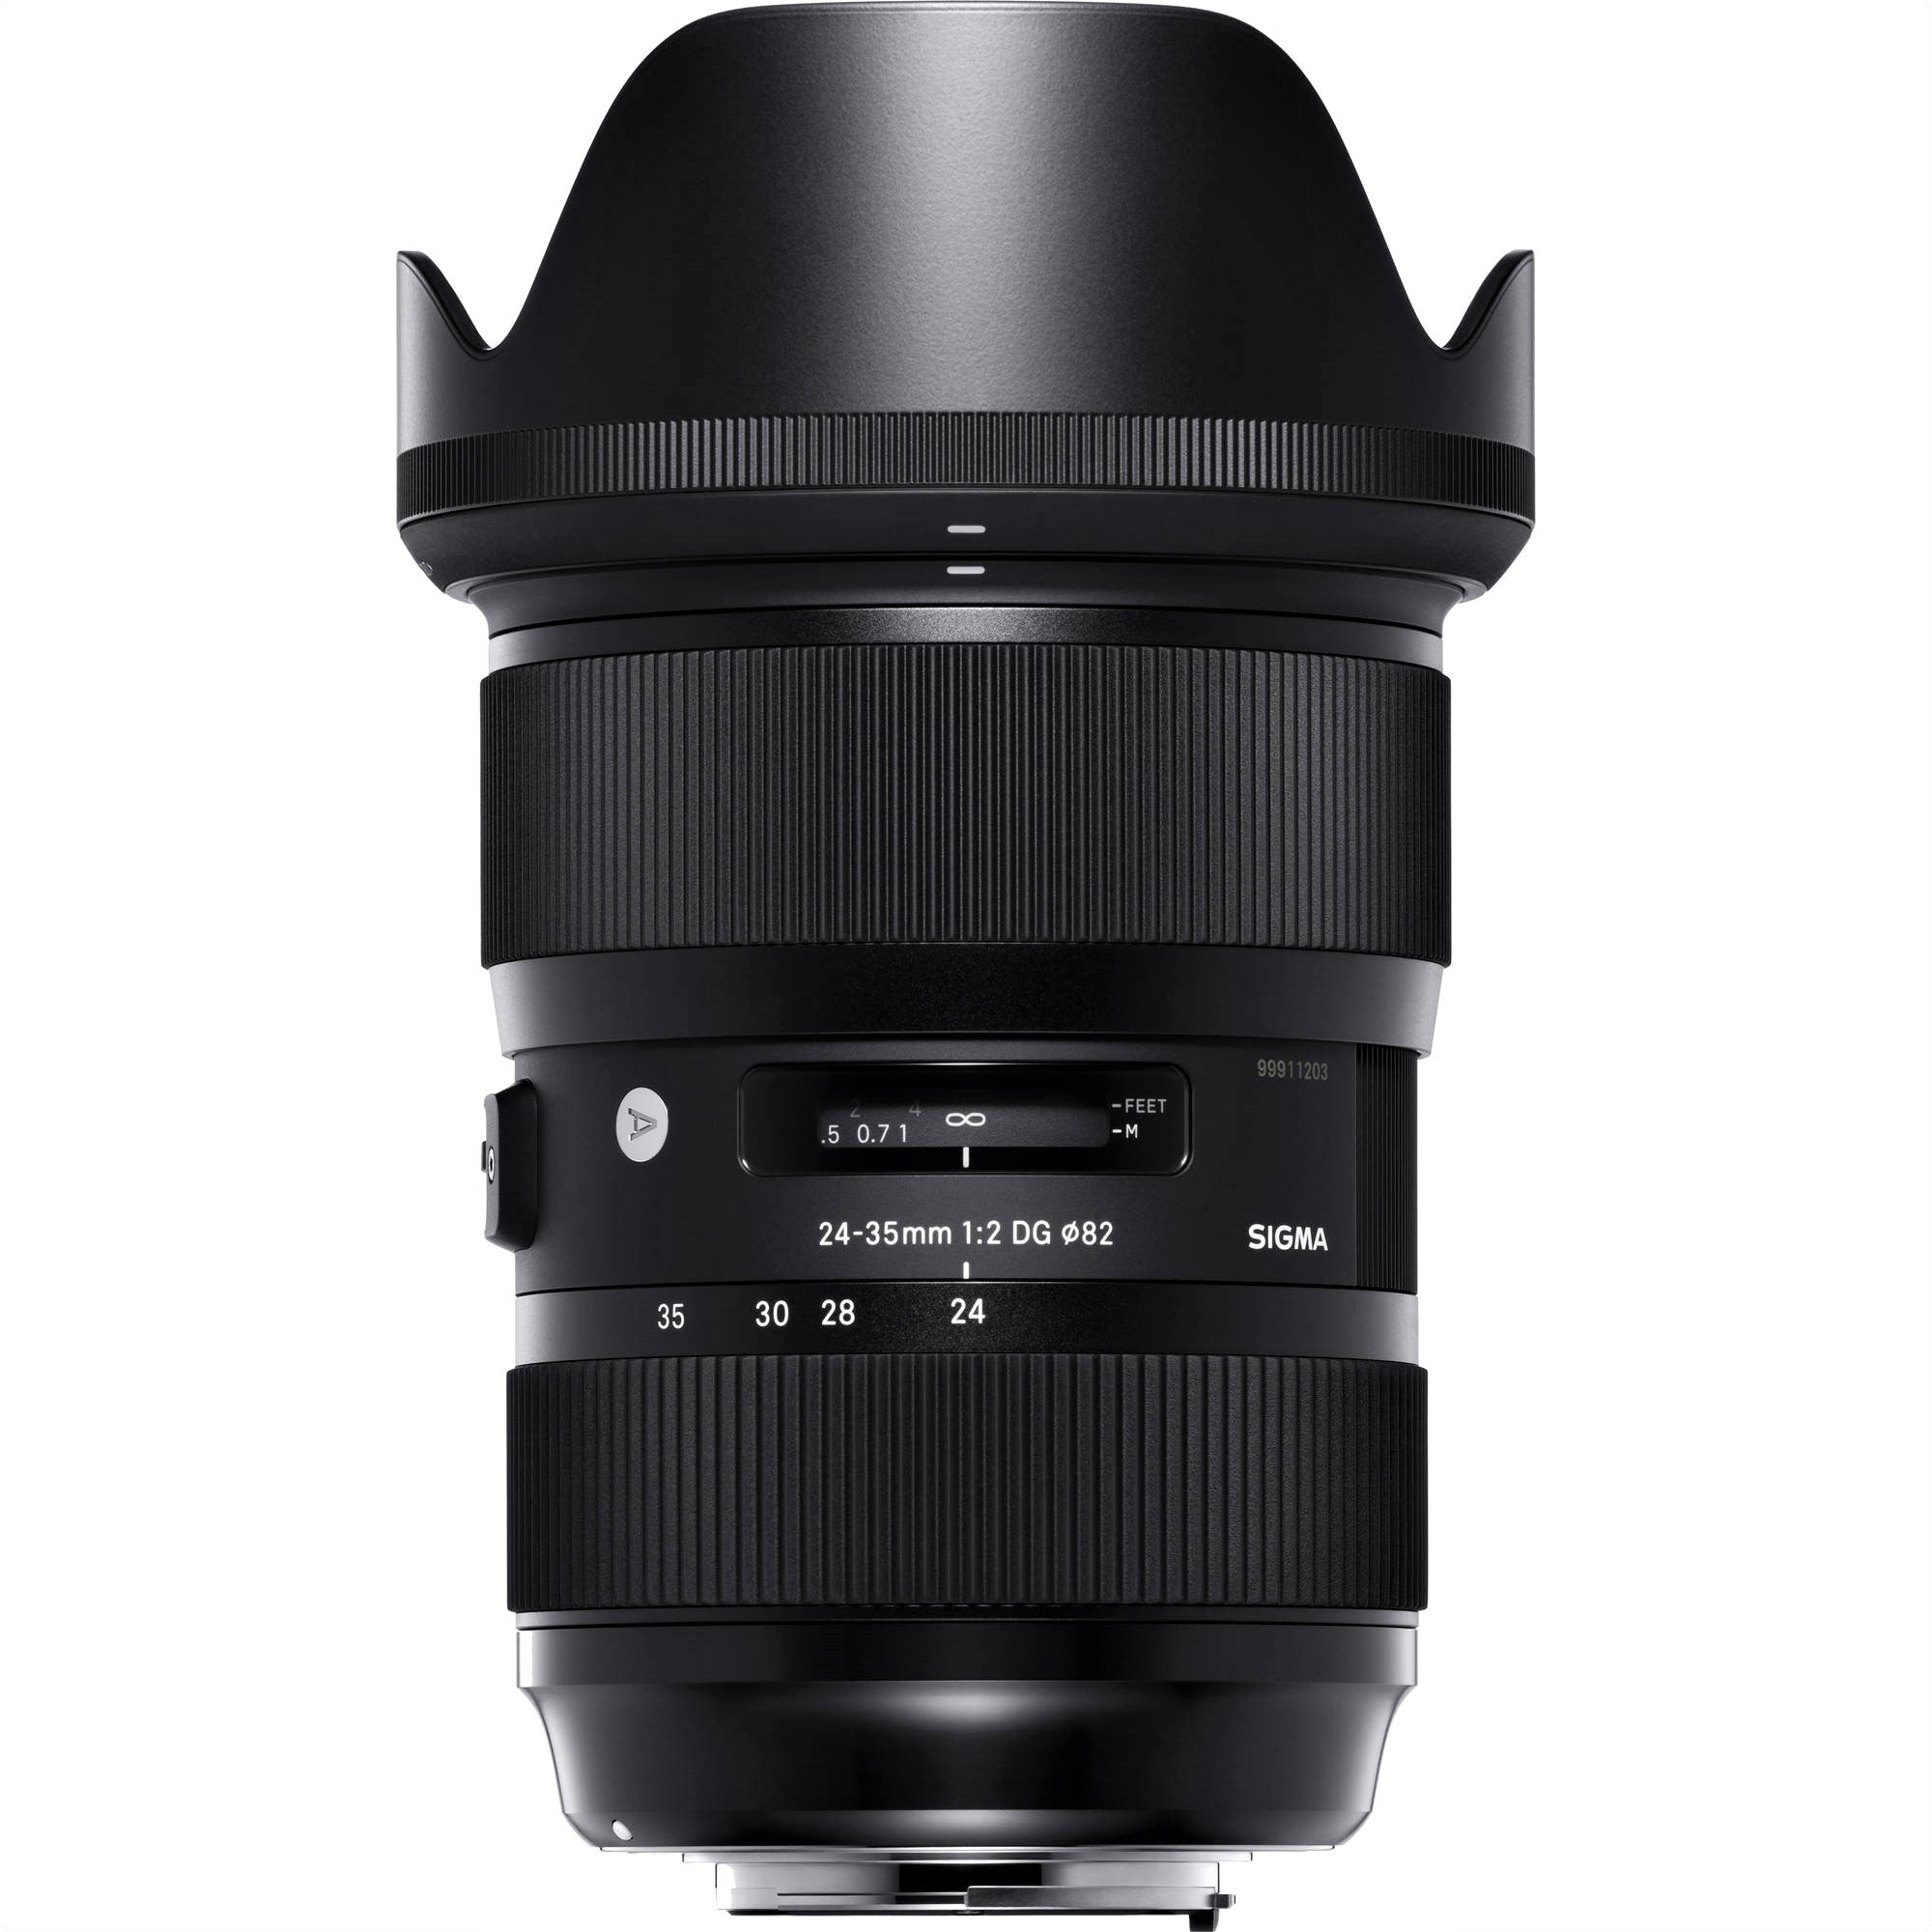 Sigma 24-35mm F2.0 DG HSM Art Lens for Sigma SA with Attached Lens Hood on the Top